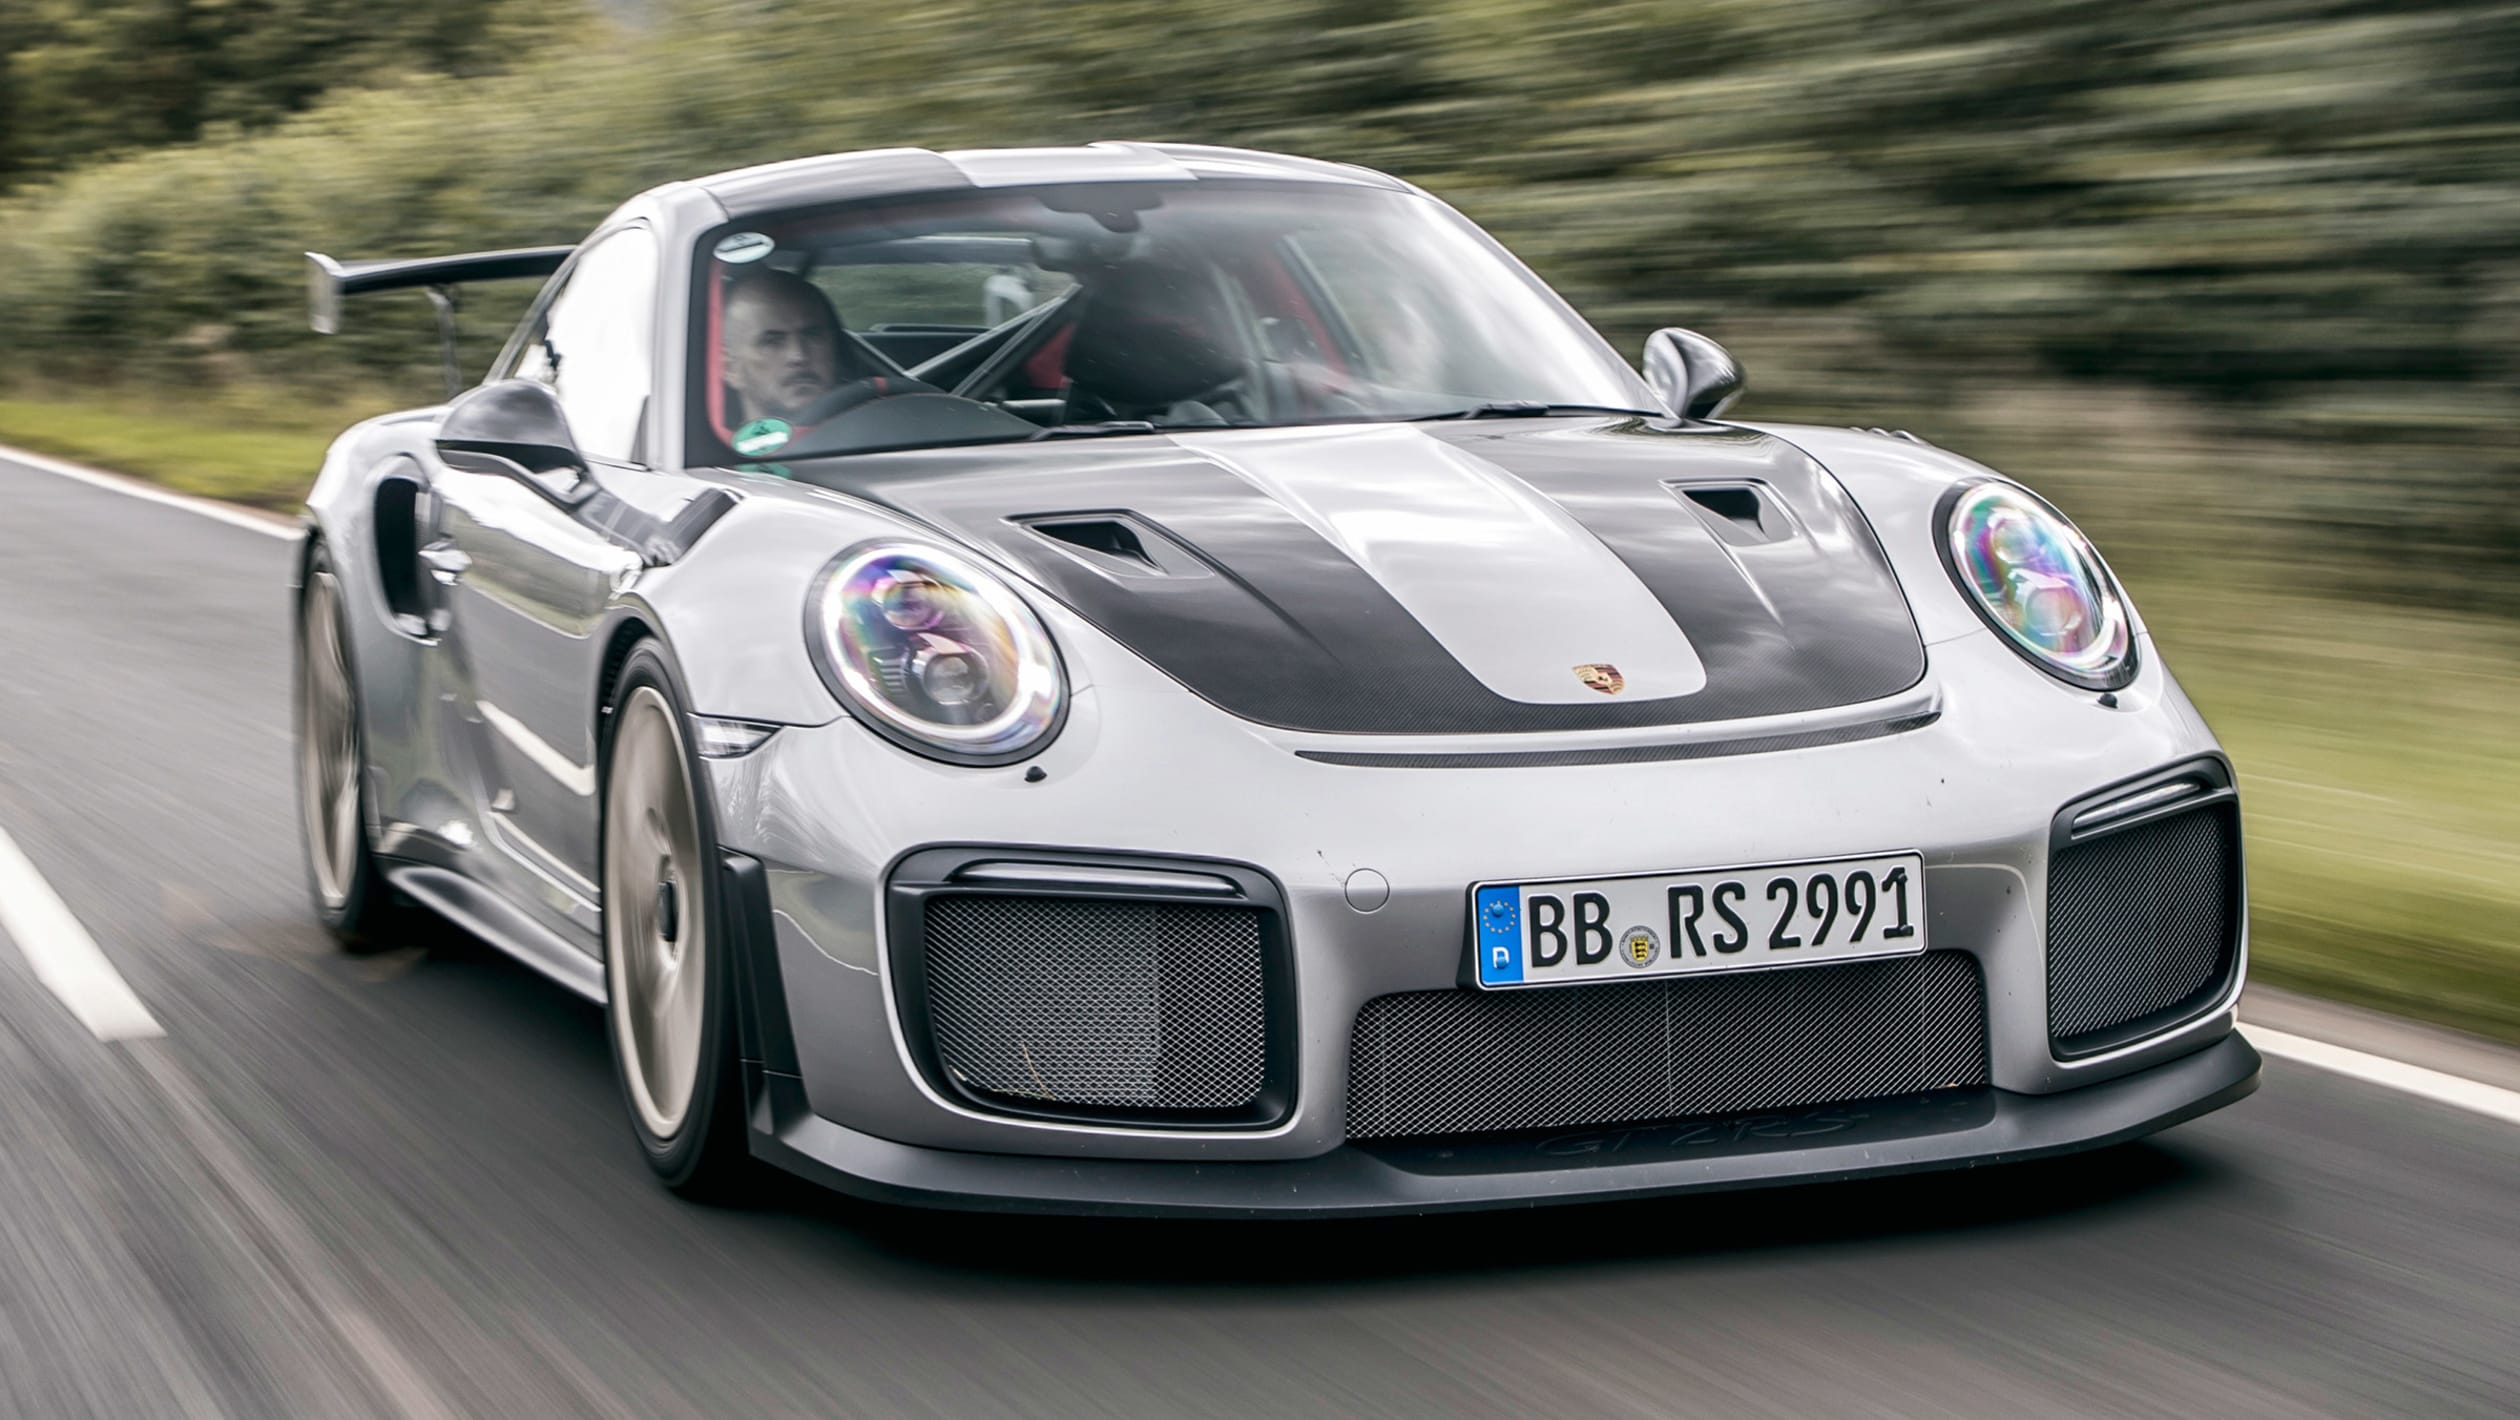 New Porsche 911 Gt2 Rs 2017 Review Pictures Auto Express